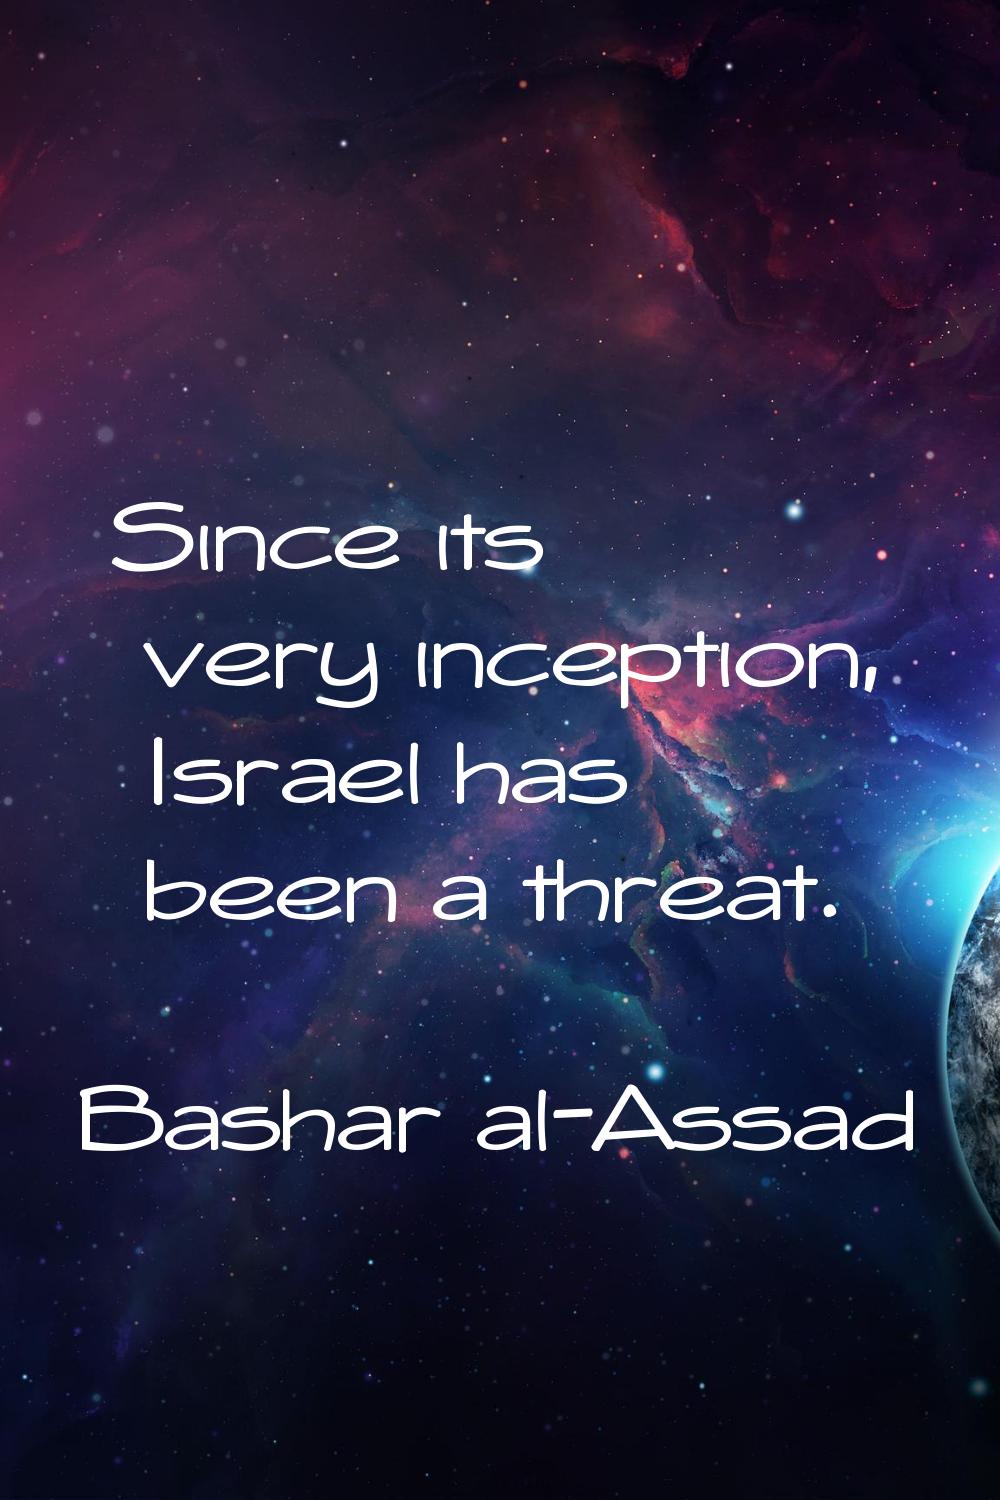 Since its very inception, Israel has been a threat.